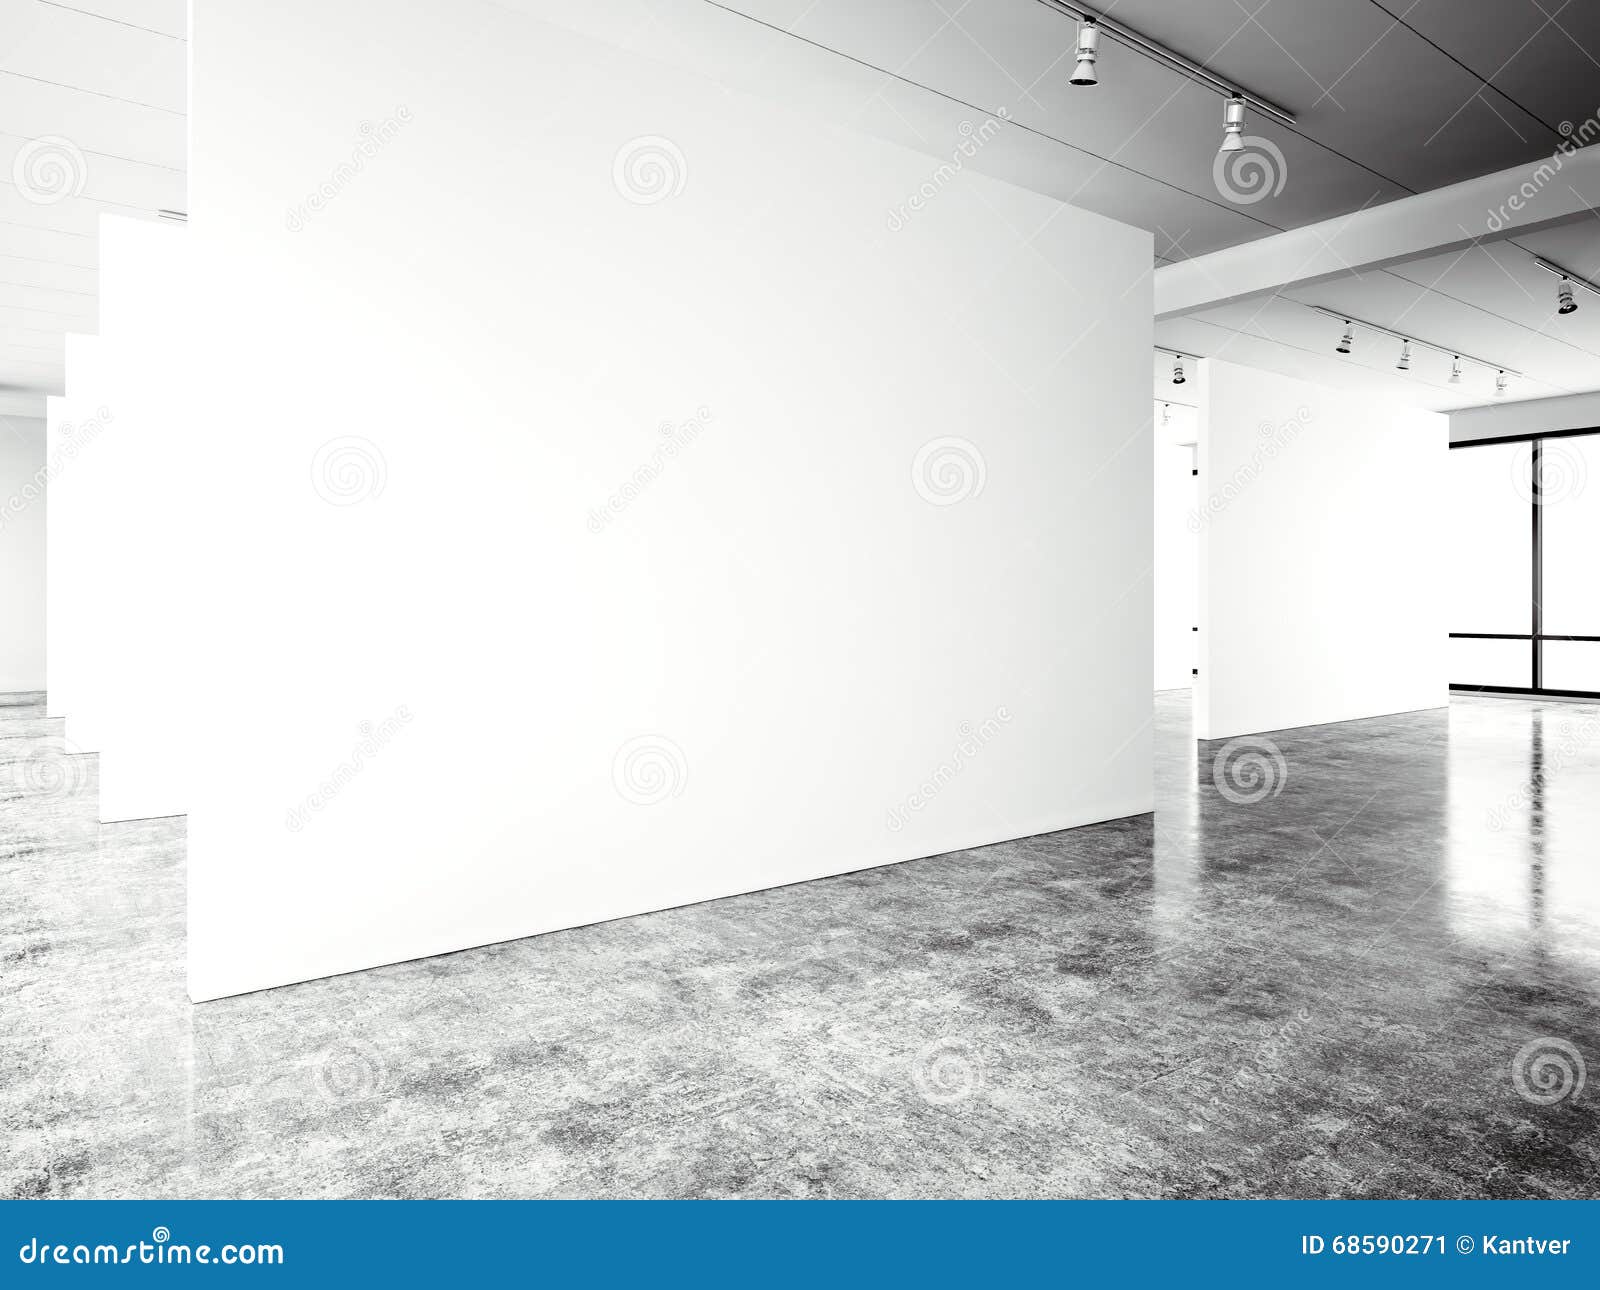 Exposition modern gallery,open space. Blank white empty canvas contemporary industrial place.Simply interior loft style with concrete floor,panoramic windows